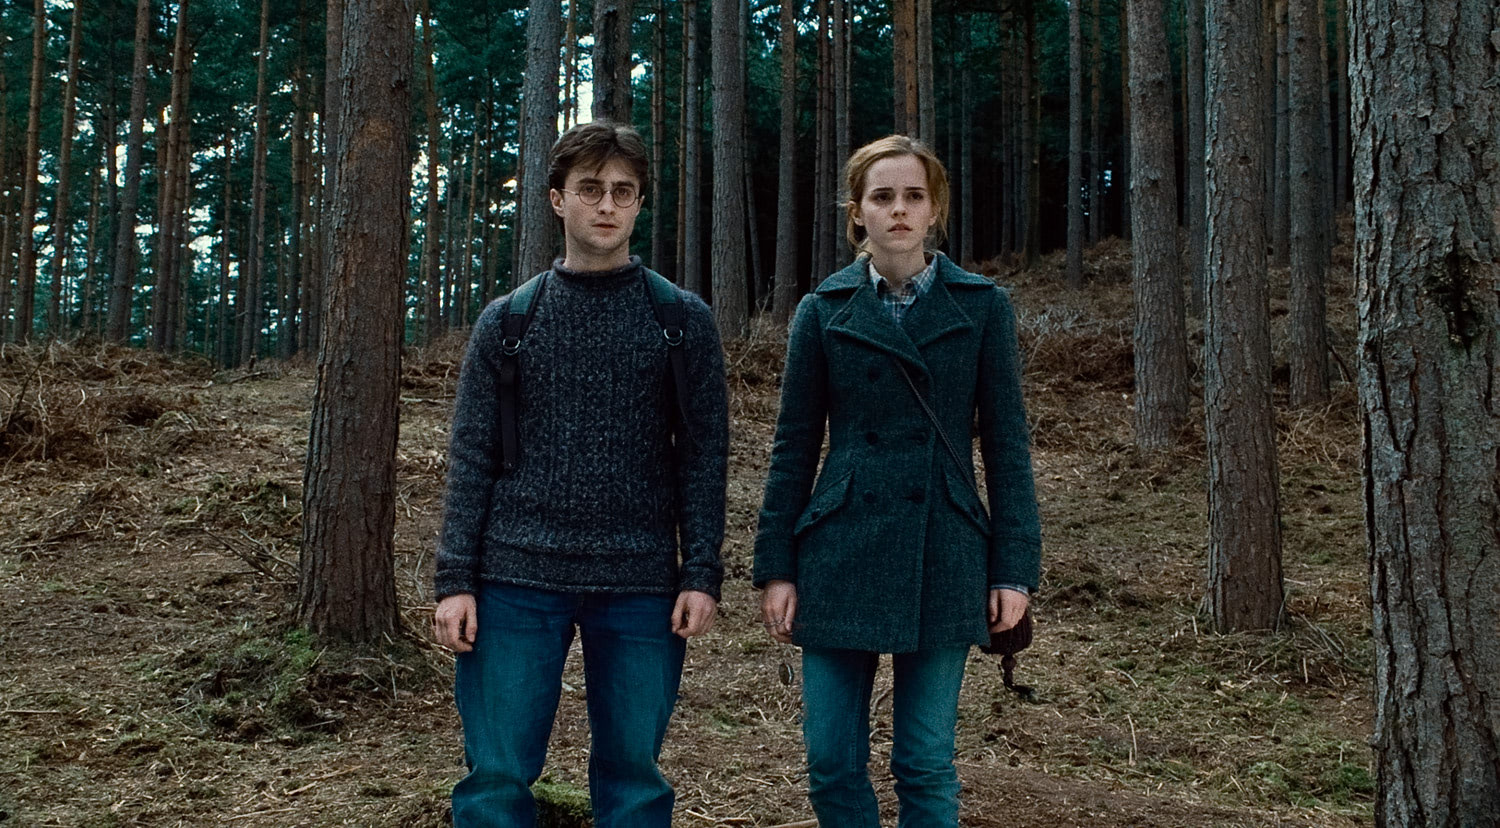 Harry and Hermione in the woods